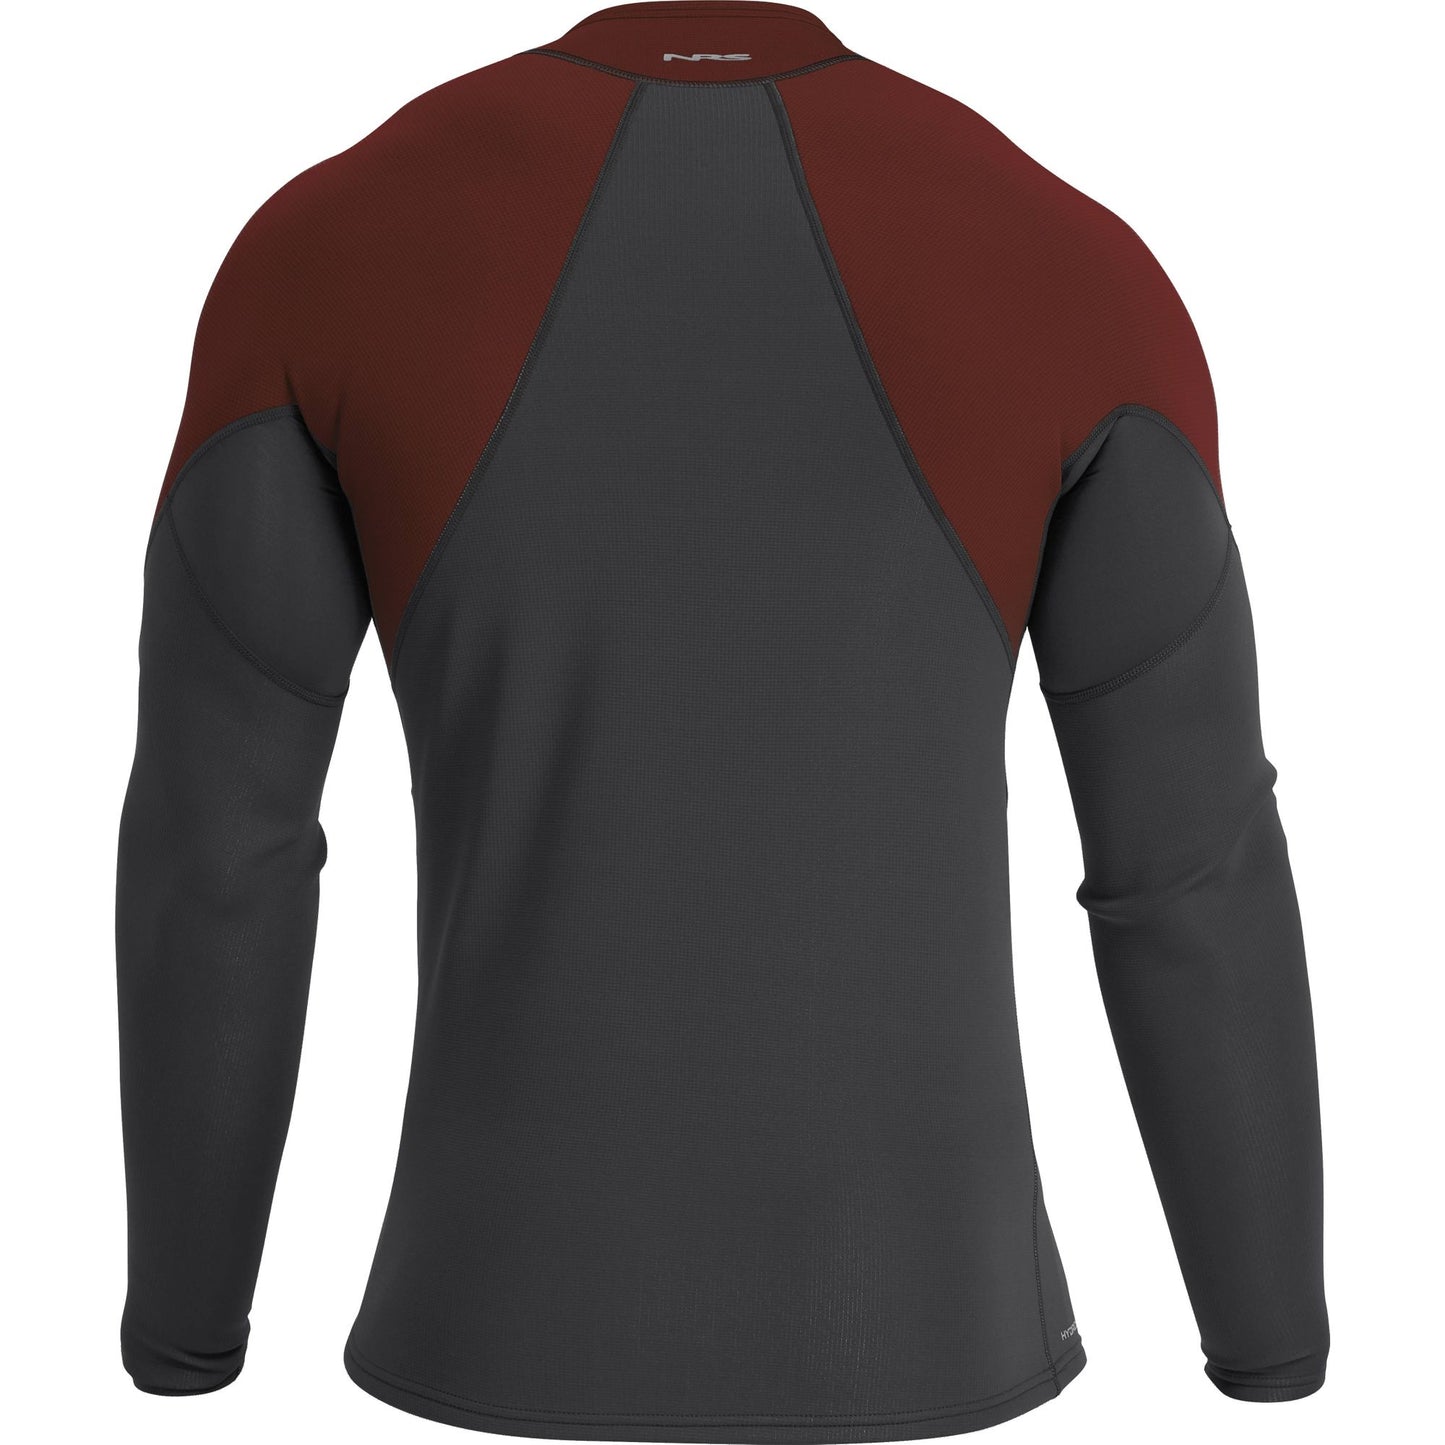 The NRS Hydroskin 0.5 Long Sleeve Shirt - Men's is an insulating top, designed with a long sleeve shirt style for men.